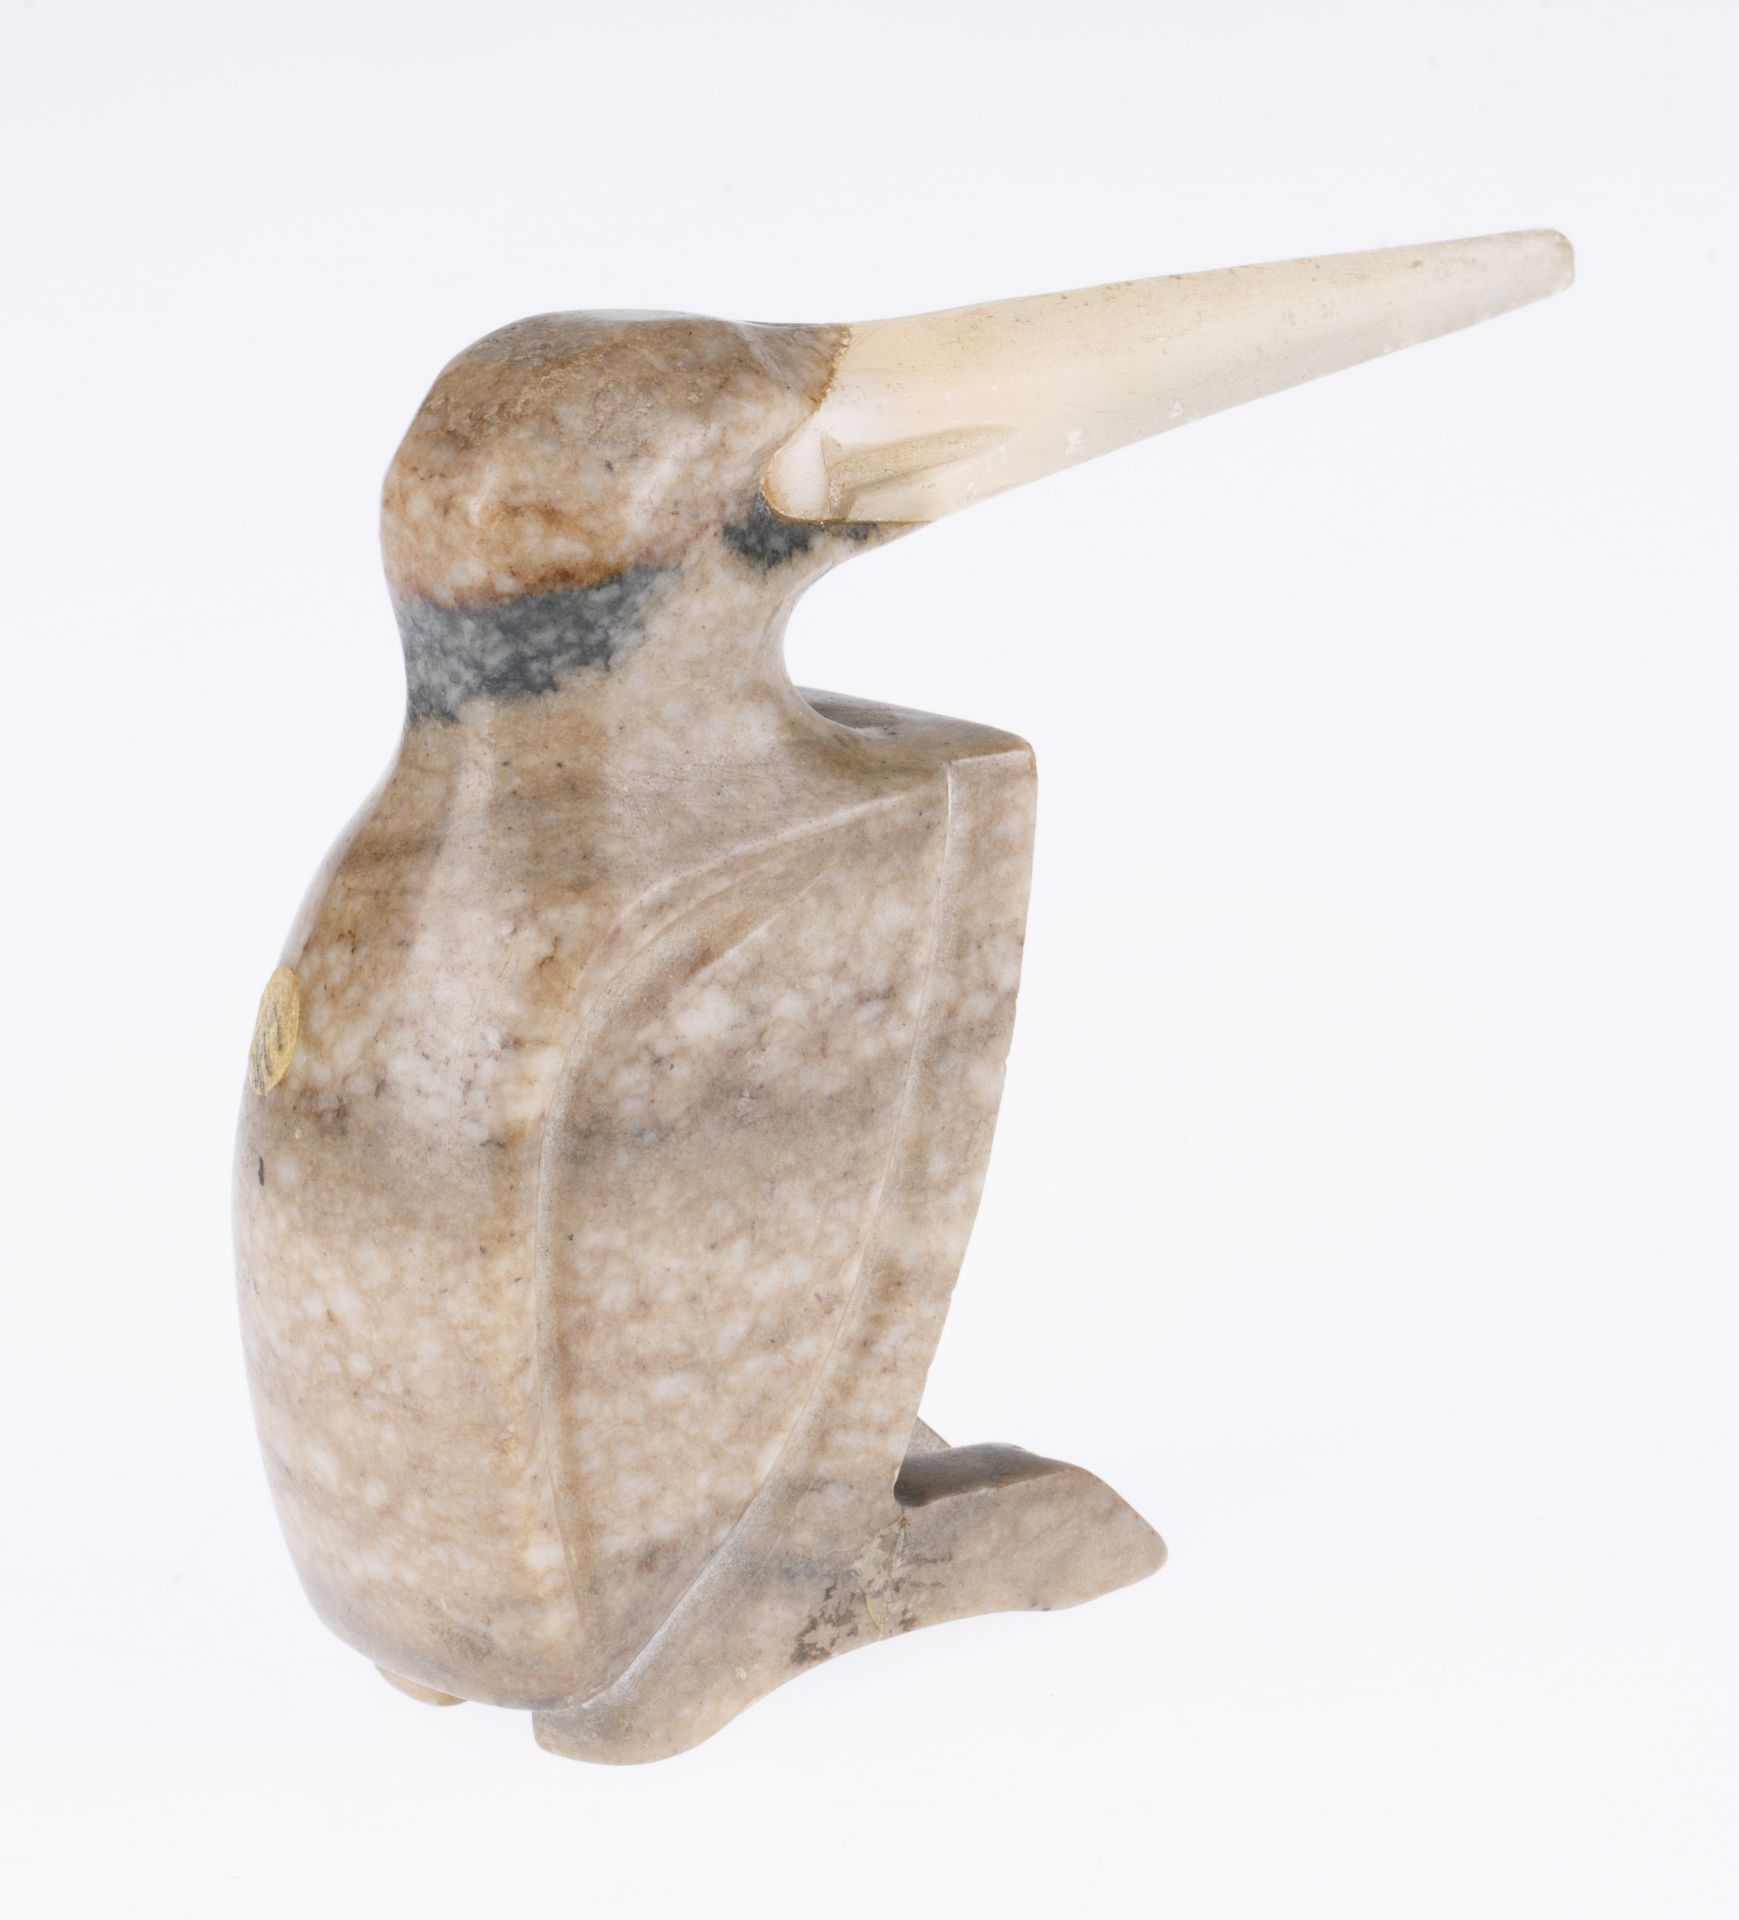 CIRCA 1915 RUSSIAN MARBLE PELICAN, ATT. TO THE IMPERIAL LAPIDARY FACTORY [HAMMER GALLERIES] - Image 2 of 5